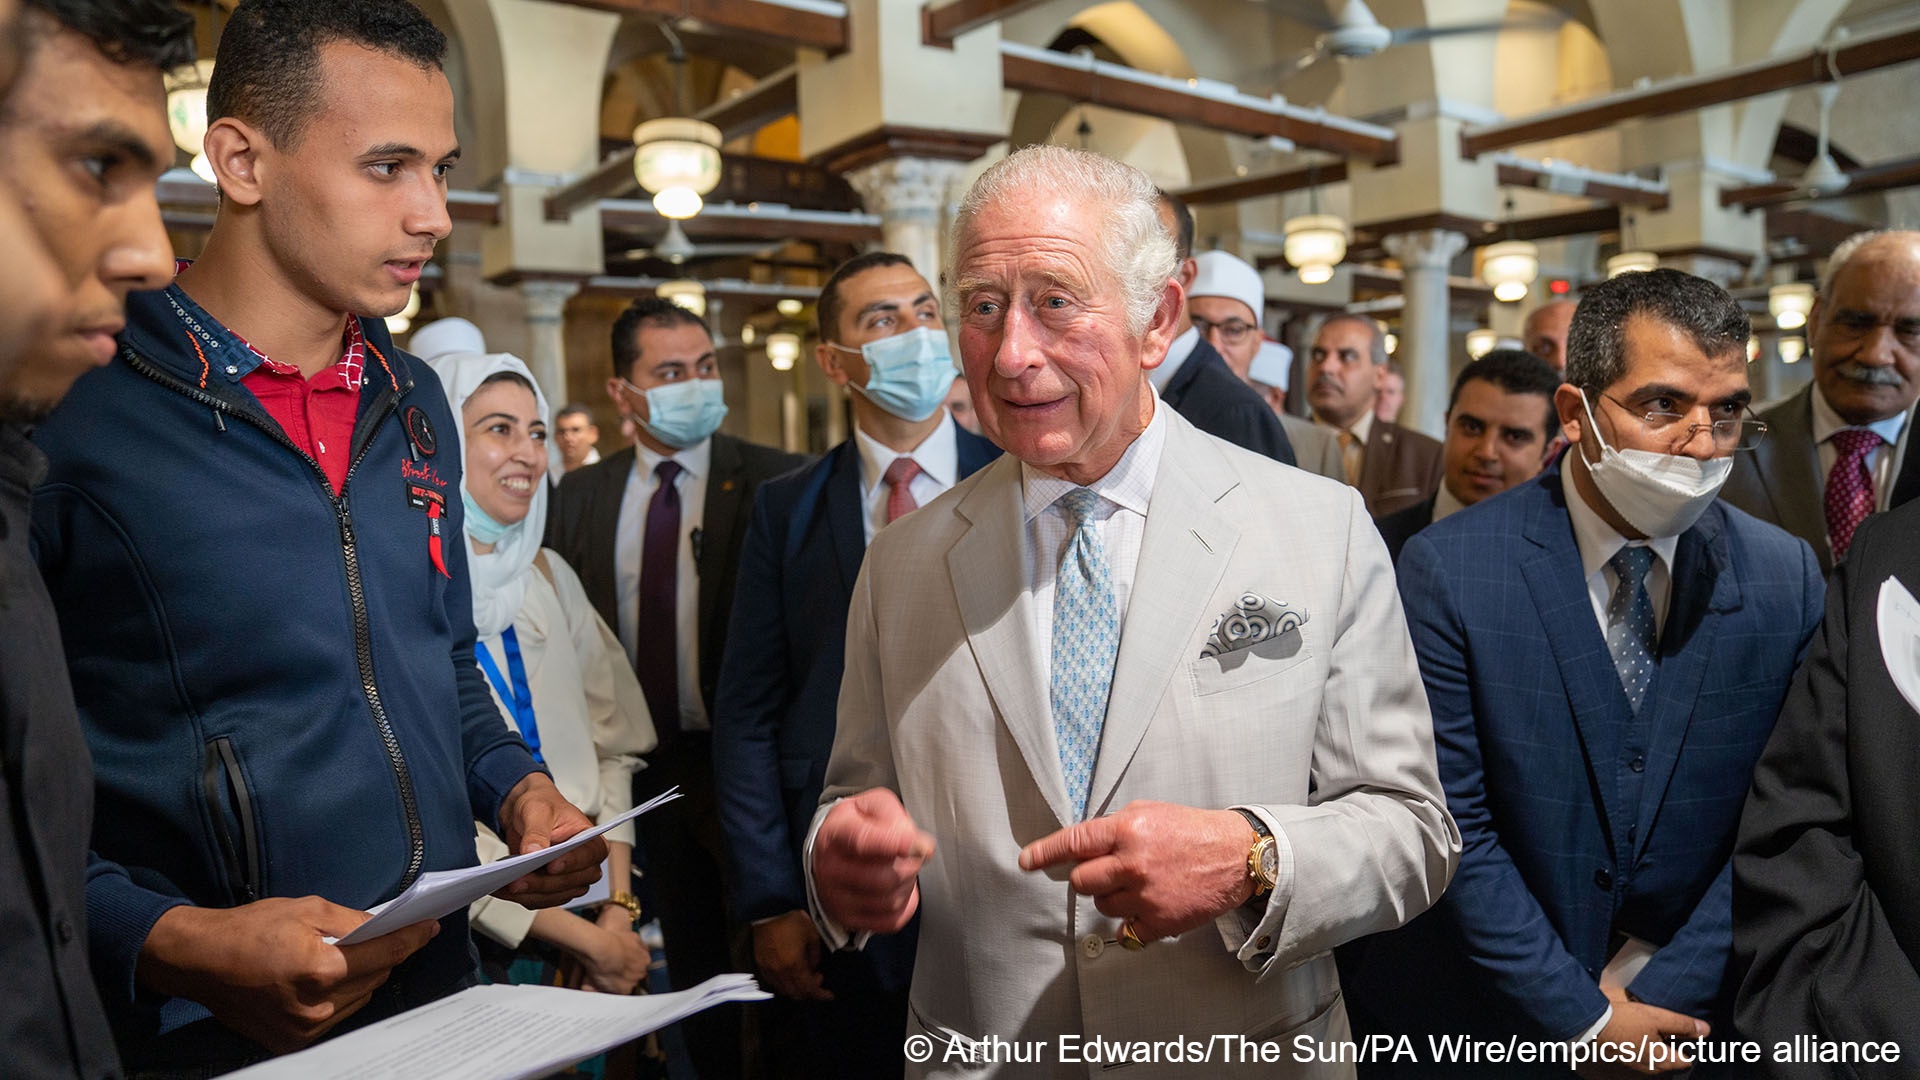 Charles, Prince of Wales (centre) meets students during an interfaith reception at Al Azhar Mosque in Cairo, Egypt, on the third day of his tour of the Middle East with the Duchess of Cornwall, 18 November 2021 (photo: picture-alliance)